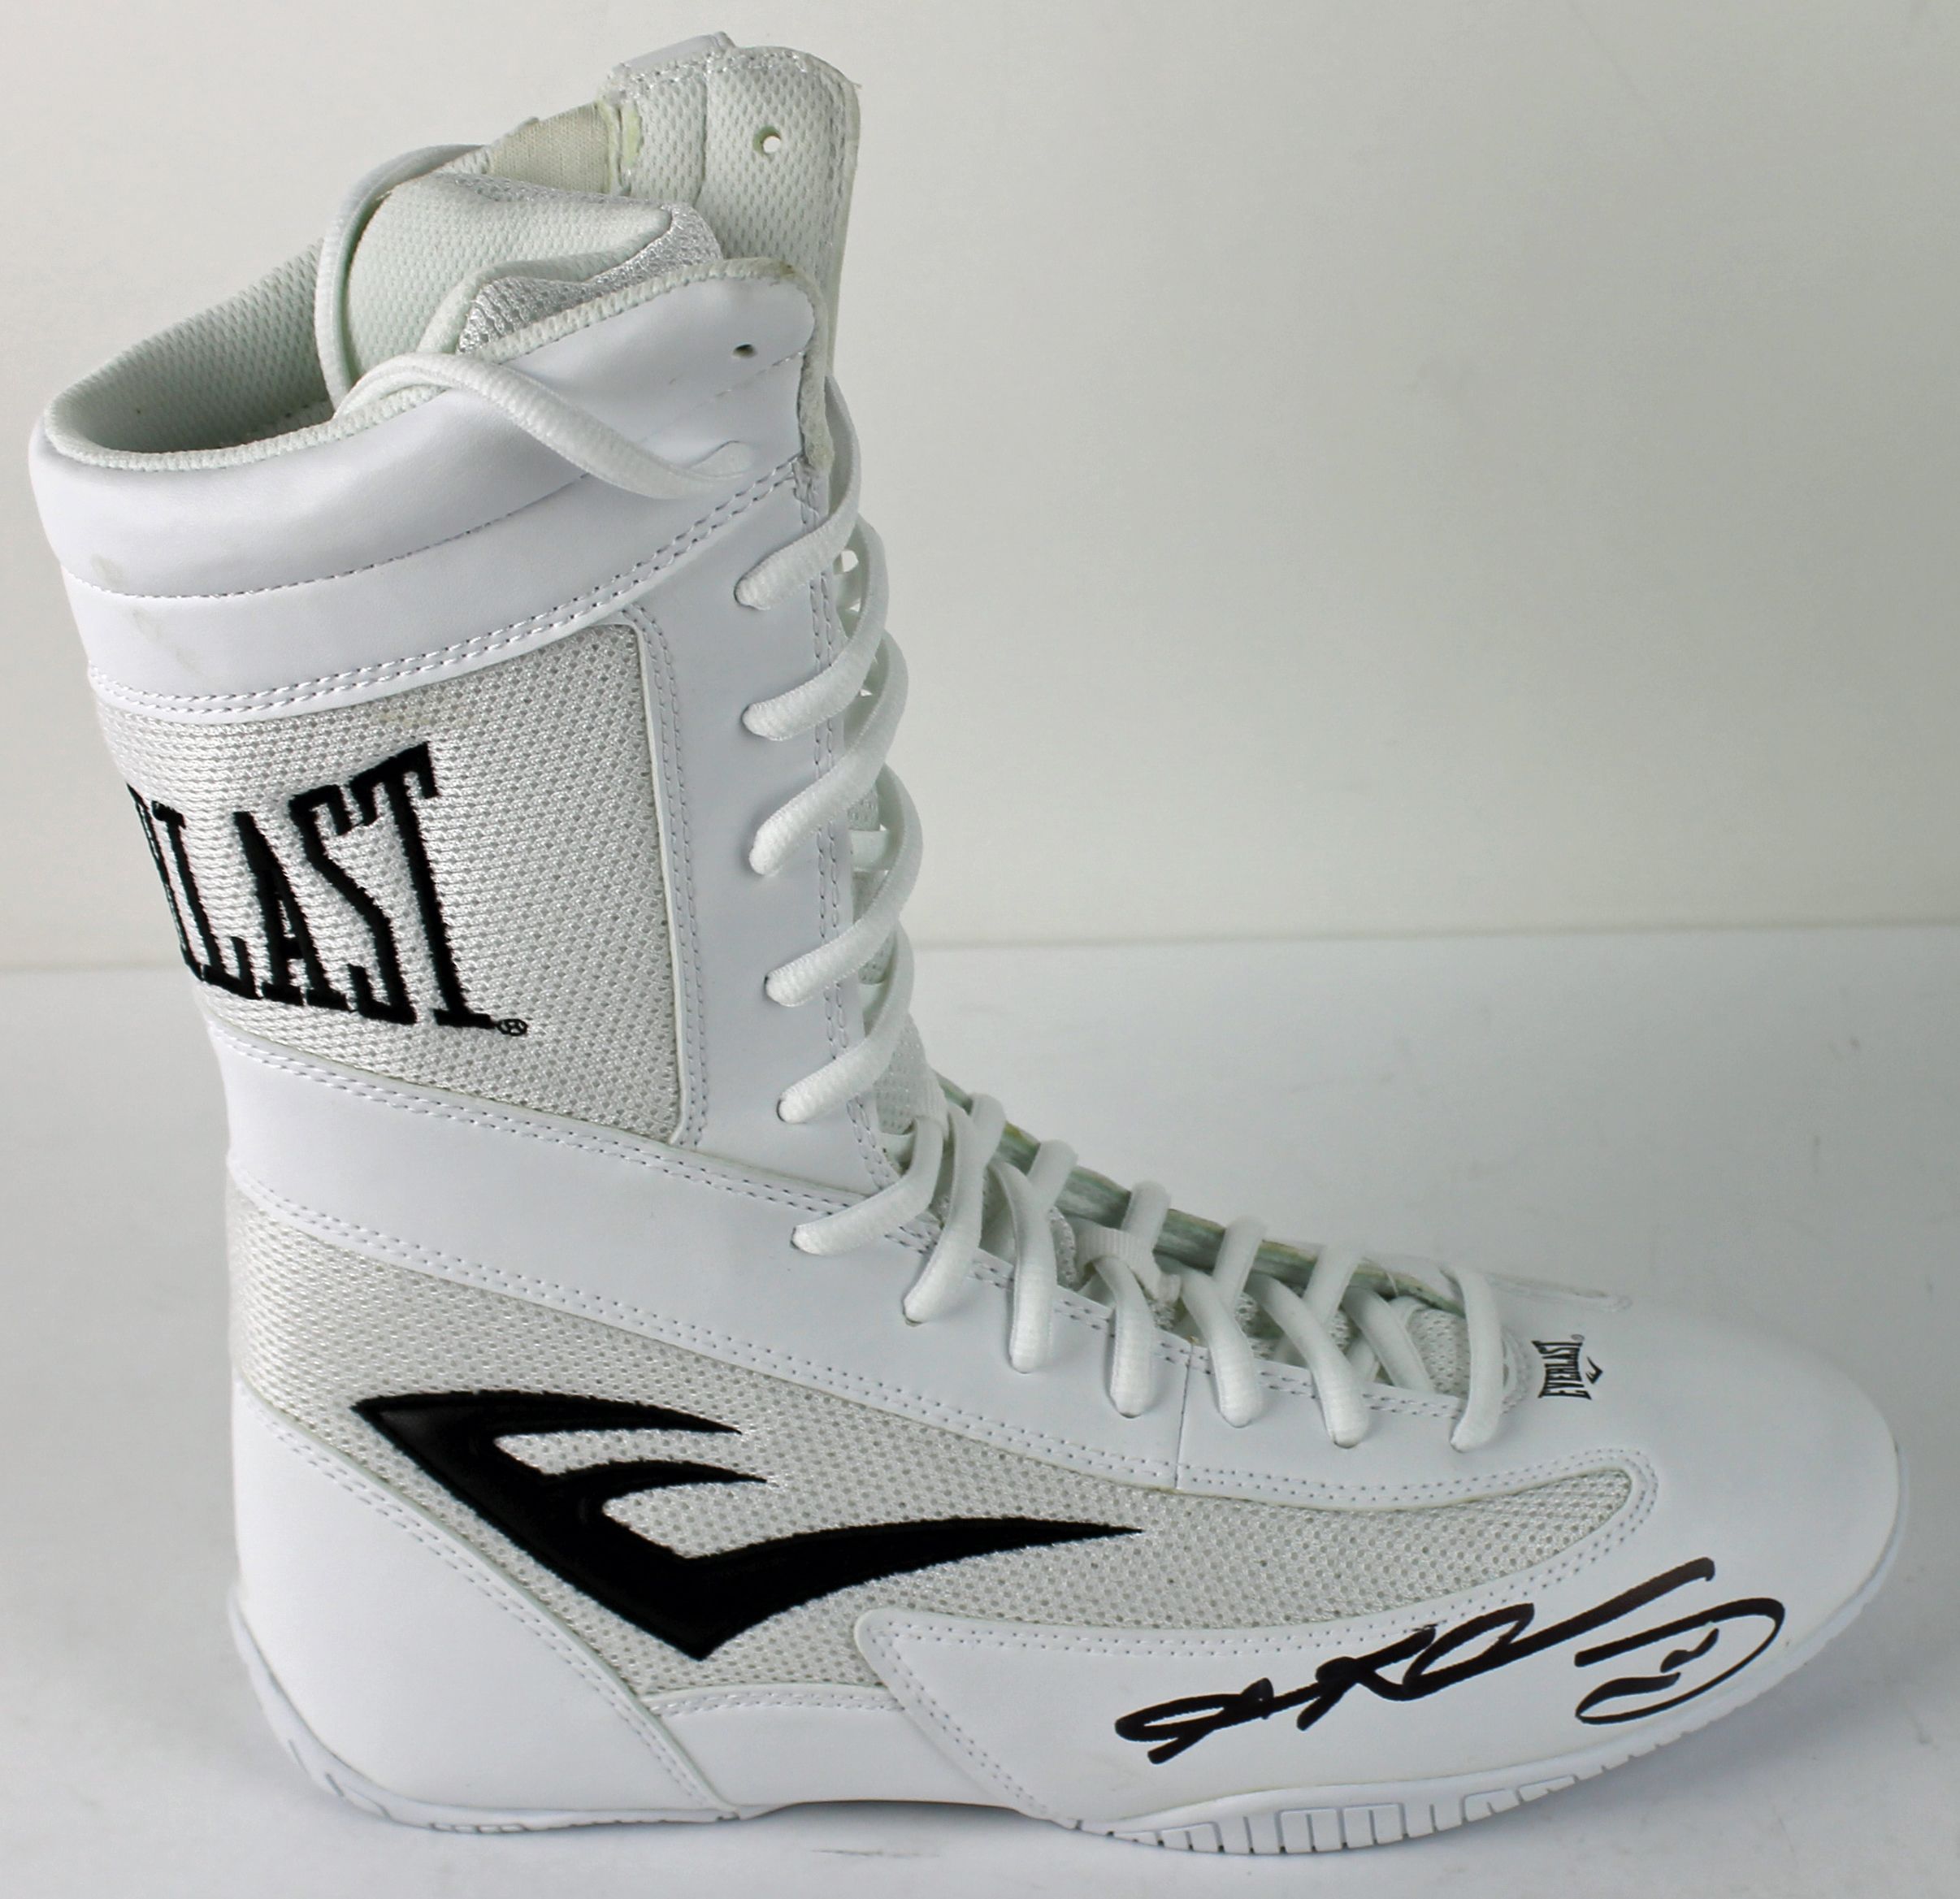 sugar rays boxing boots